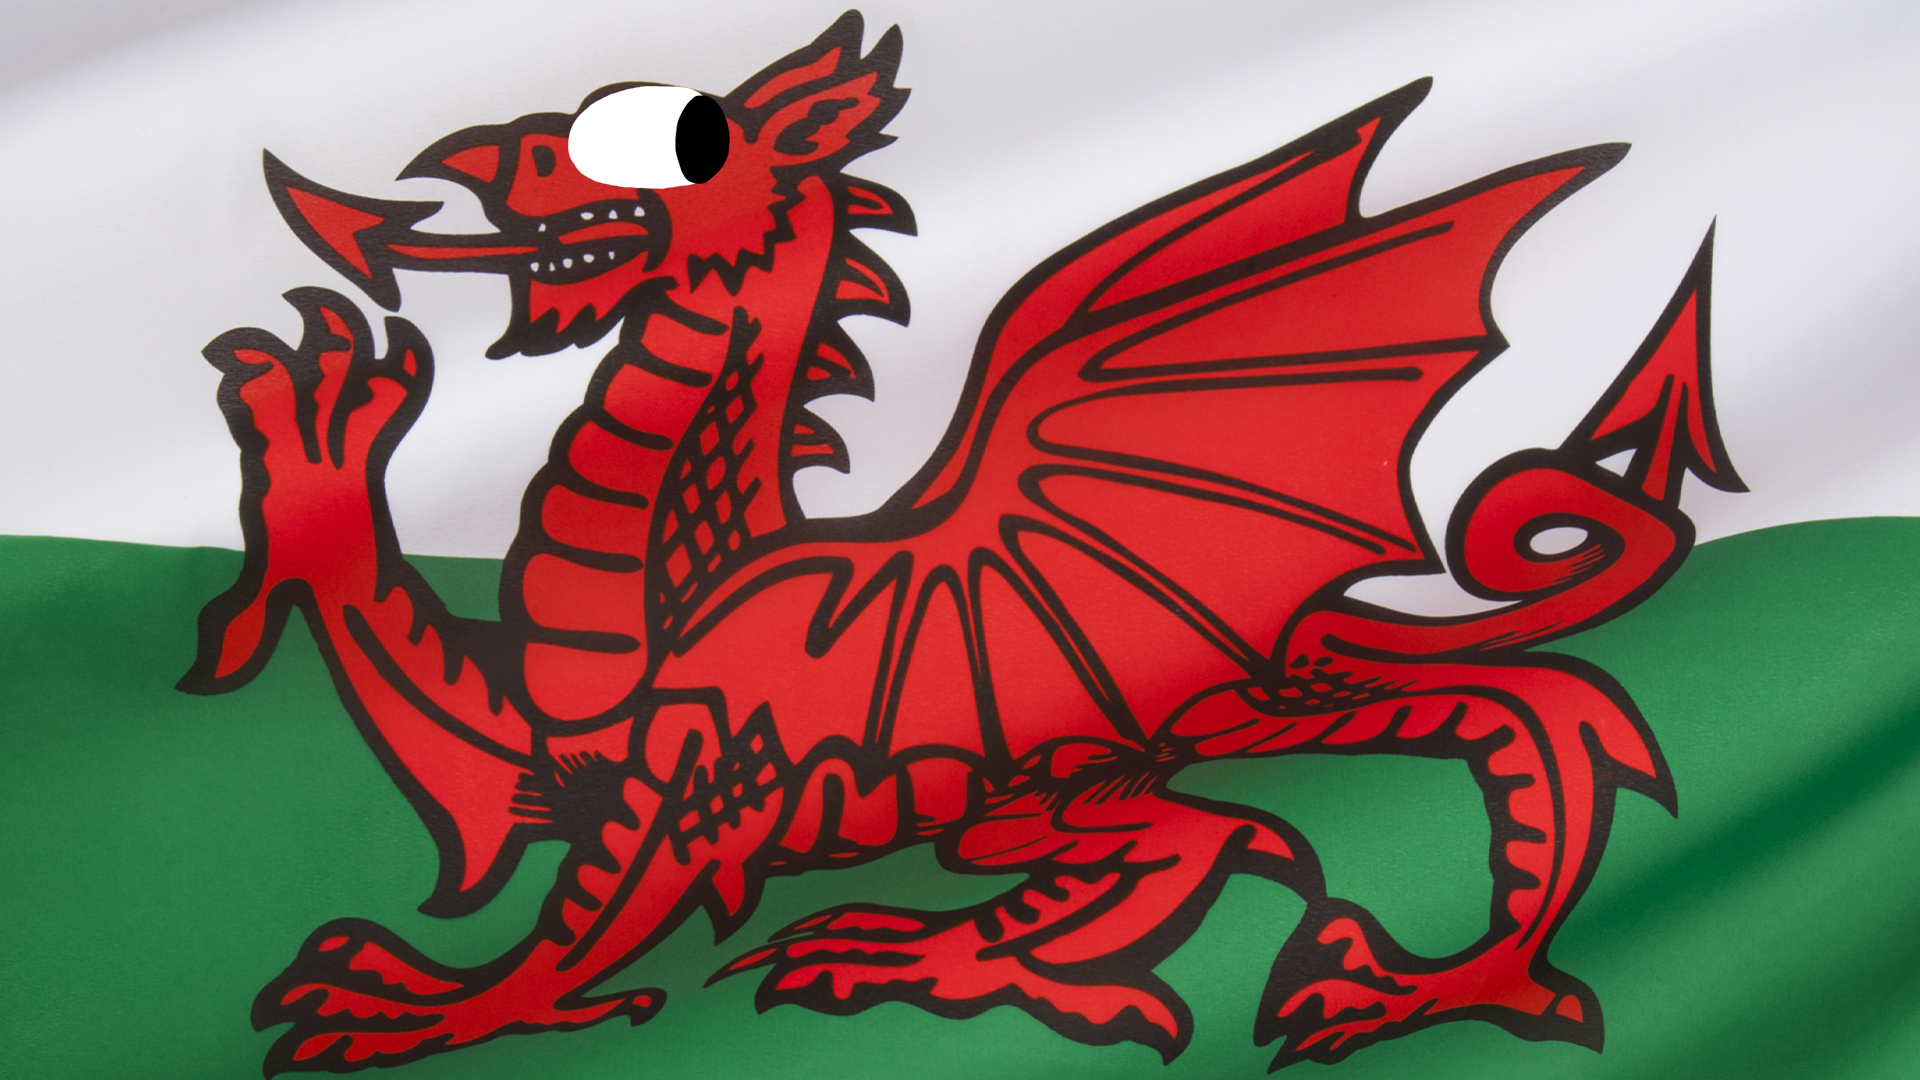 Welsh flag with side eye dragon